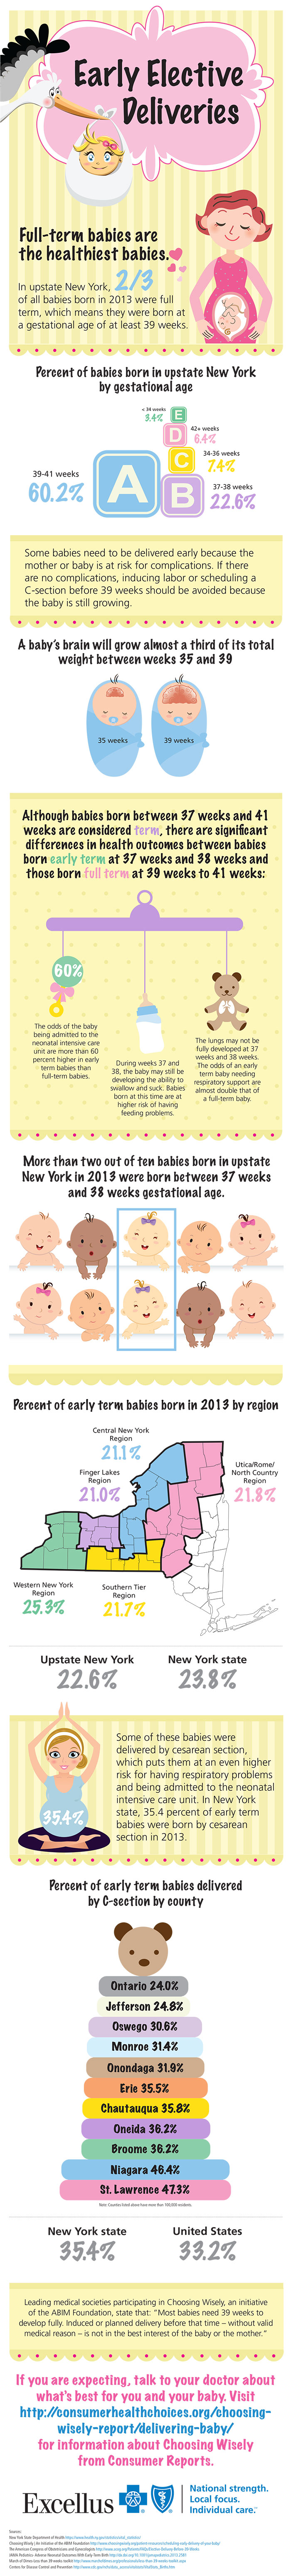 There are significant differences in health outcomes between babies born early term between 37 weeks and 38 weeks, and those born full term at 39 weeks to 41 weeks. 